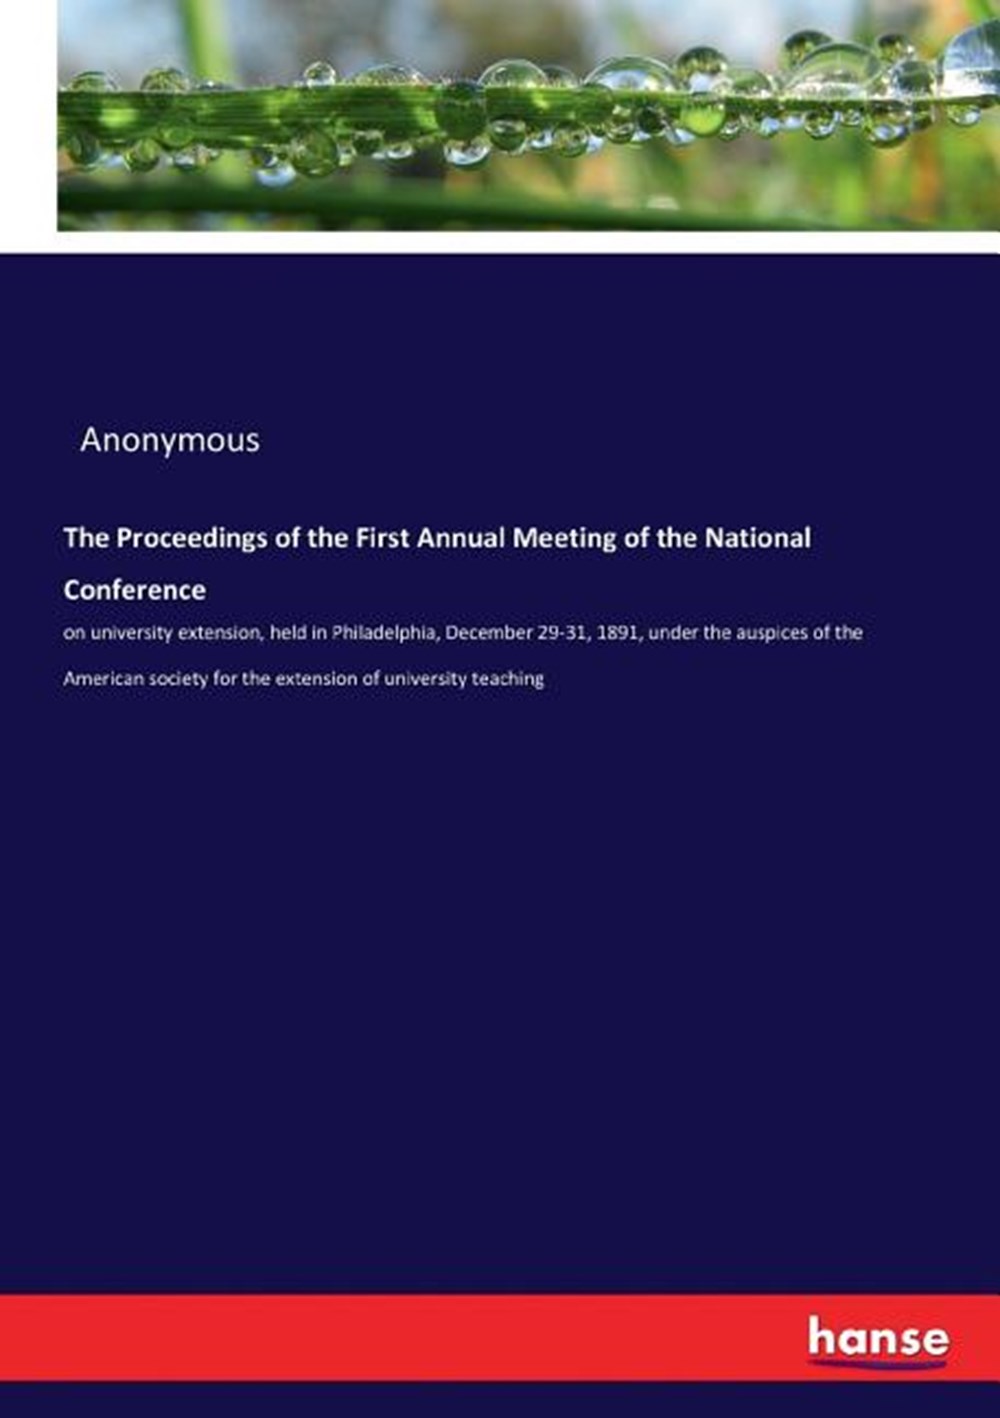 Proceedings of the First Annual Meeting of the National Conference: on university extension, held in